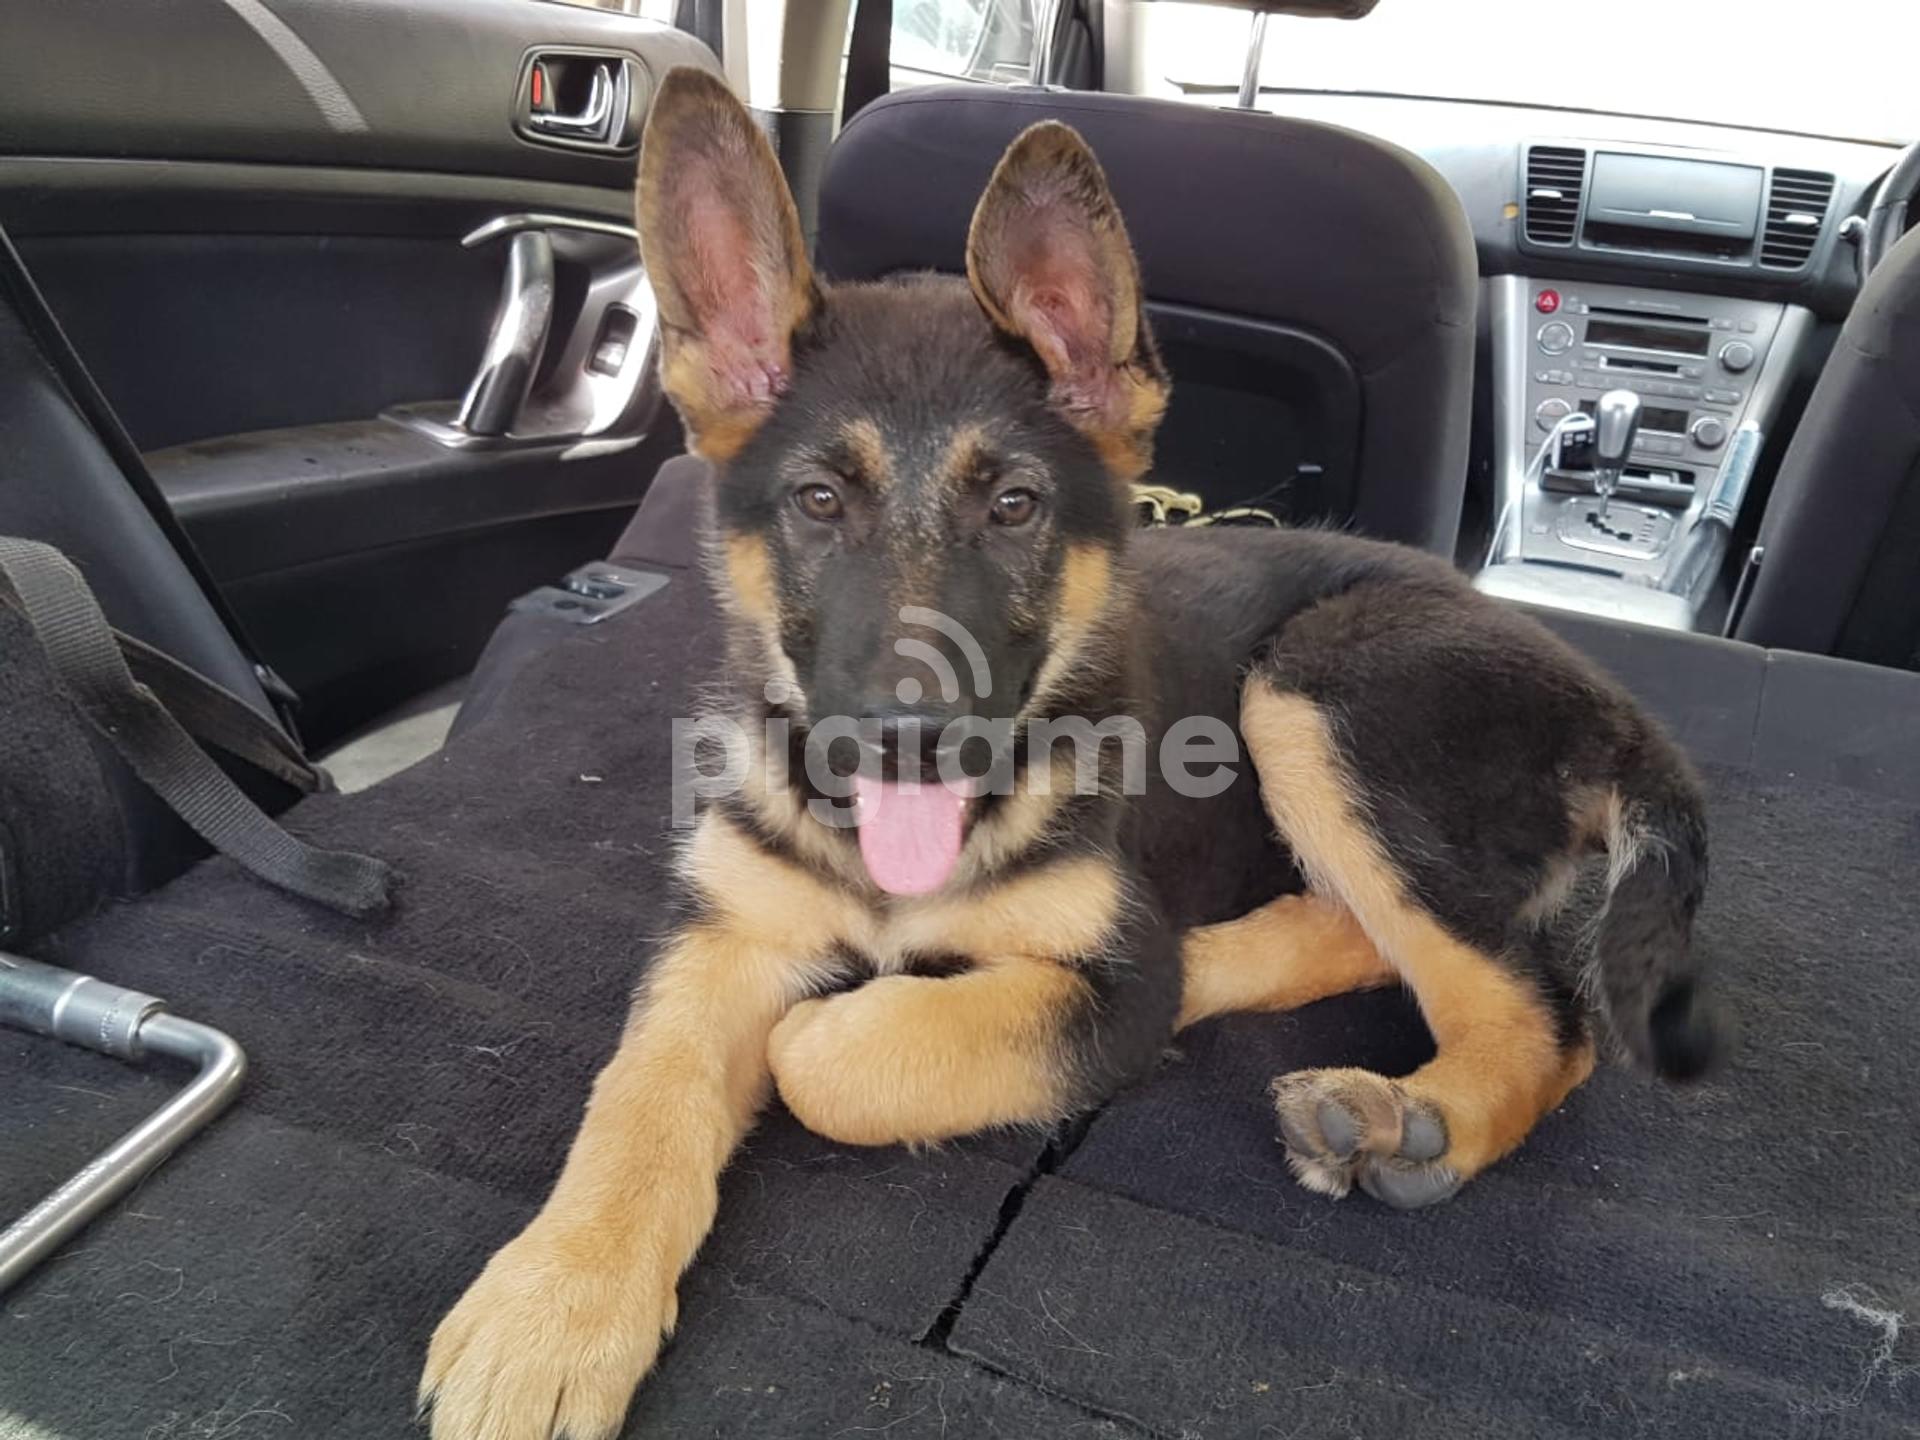 15 Best Pictures Gsd Puppies For Sale California / German Shepherd Puppies For Sale Gsd Puppies Greenfield Puppies